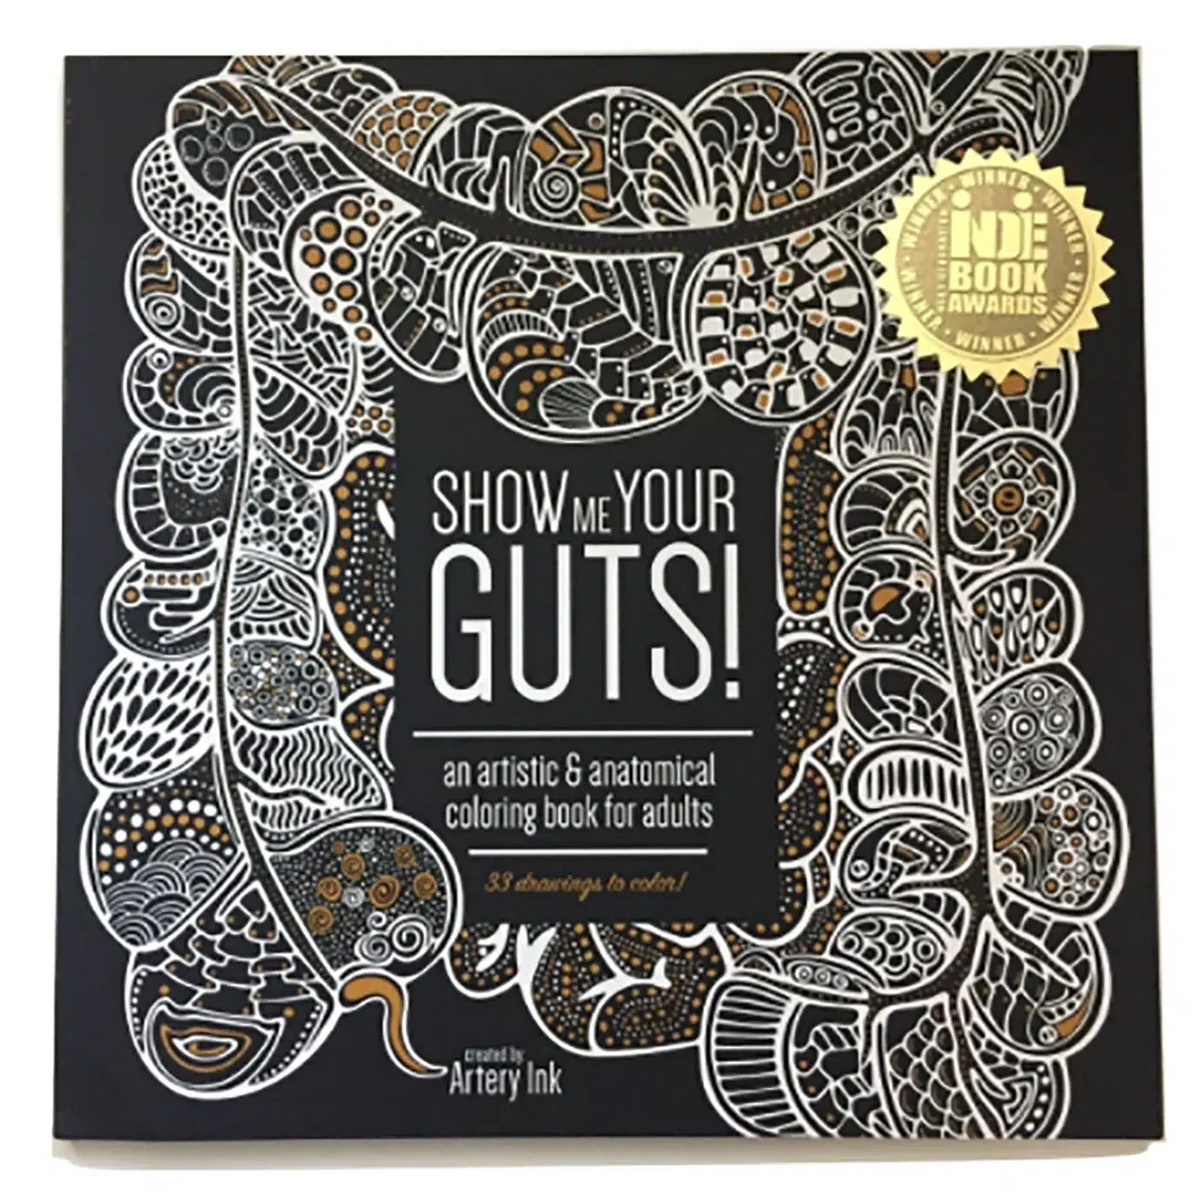 Front view of the front cover of the adult coloring book Show Me Your Guts! showing the award sticker.